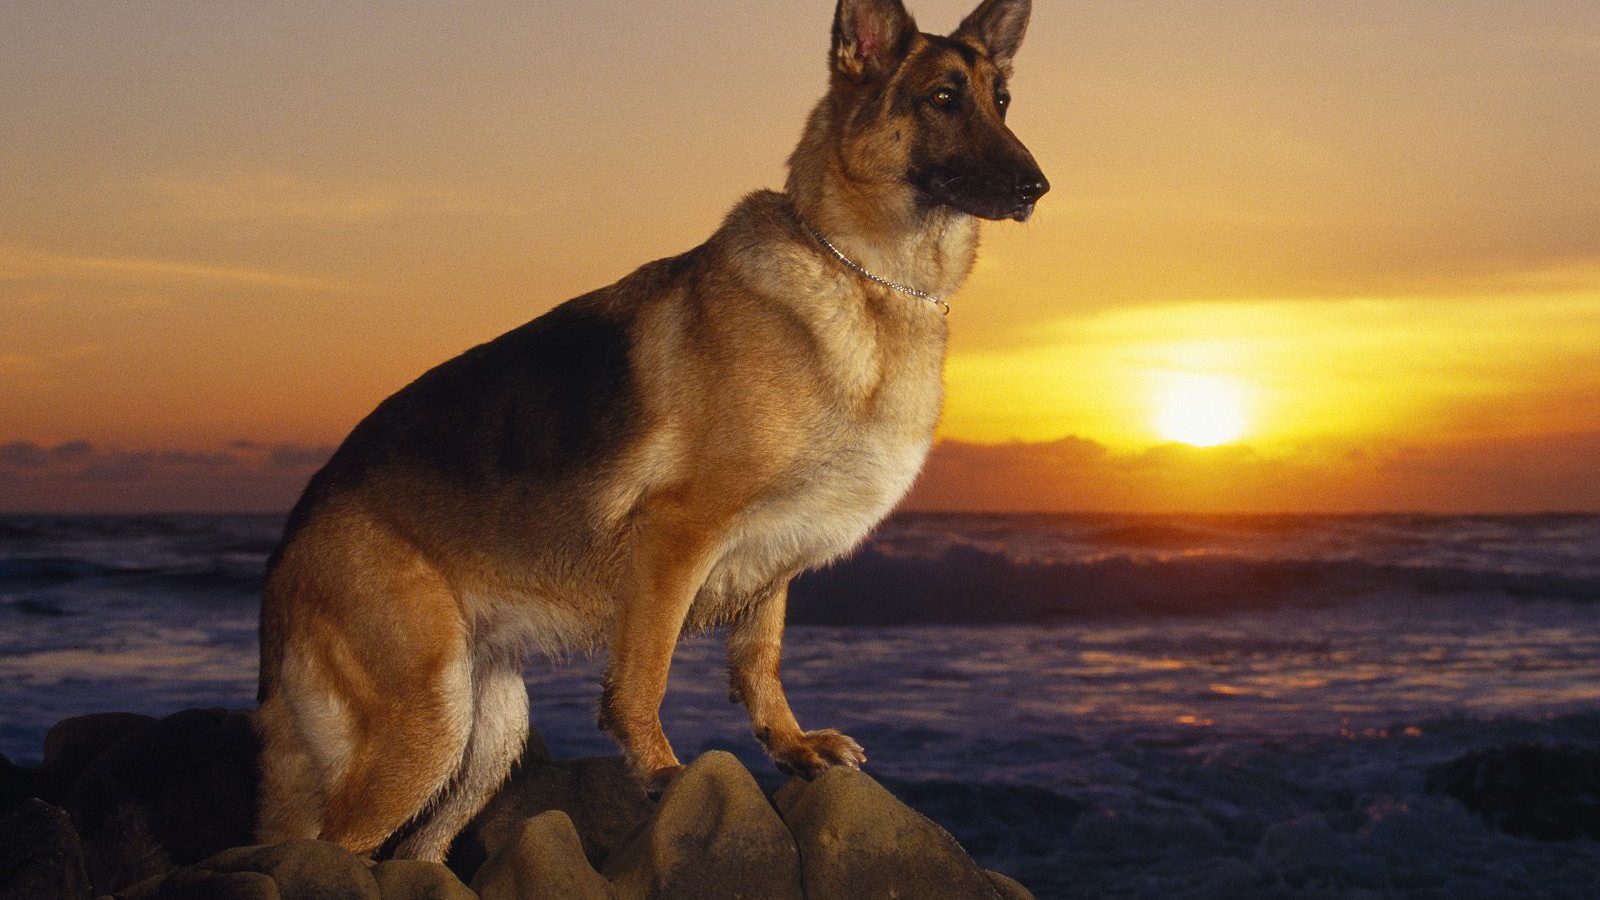 A Day At The Beach German Shepherd HD Wallpaper Backgrounds Dog Pictures